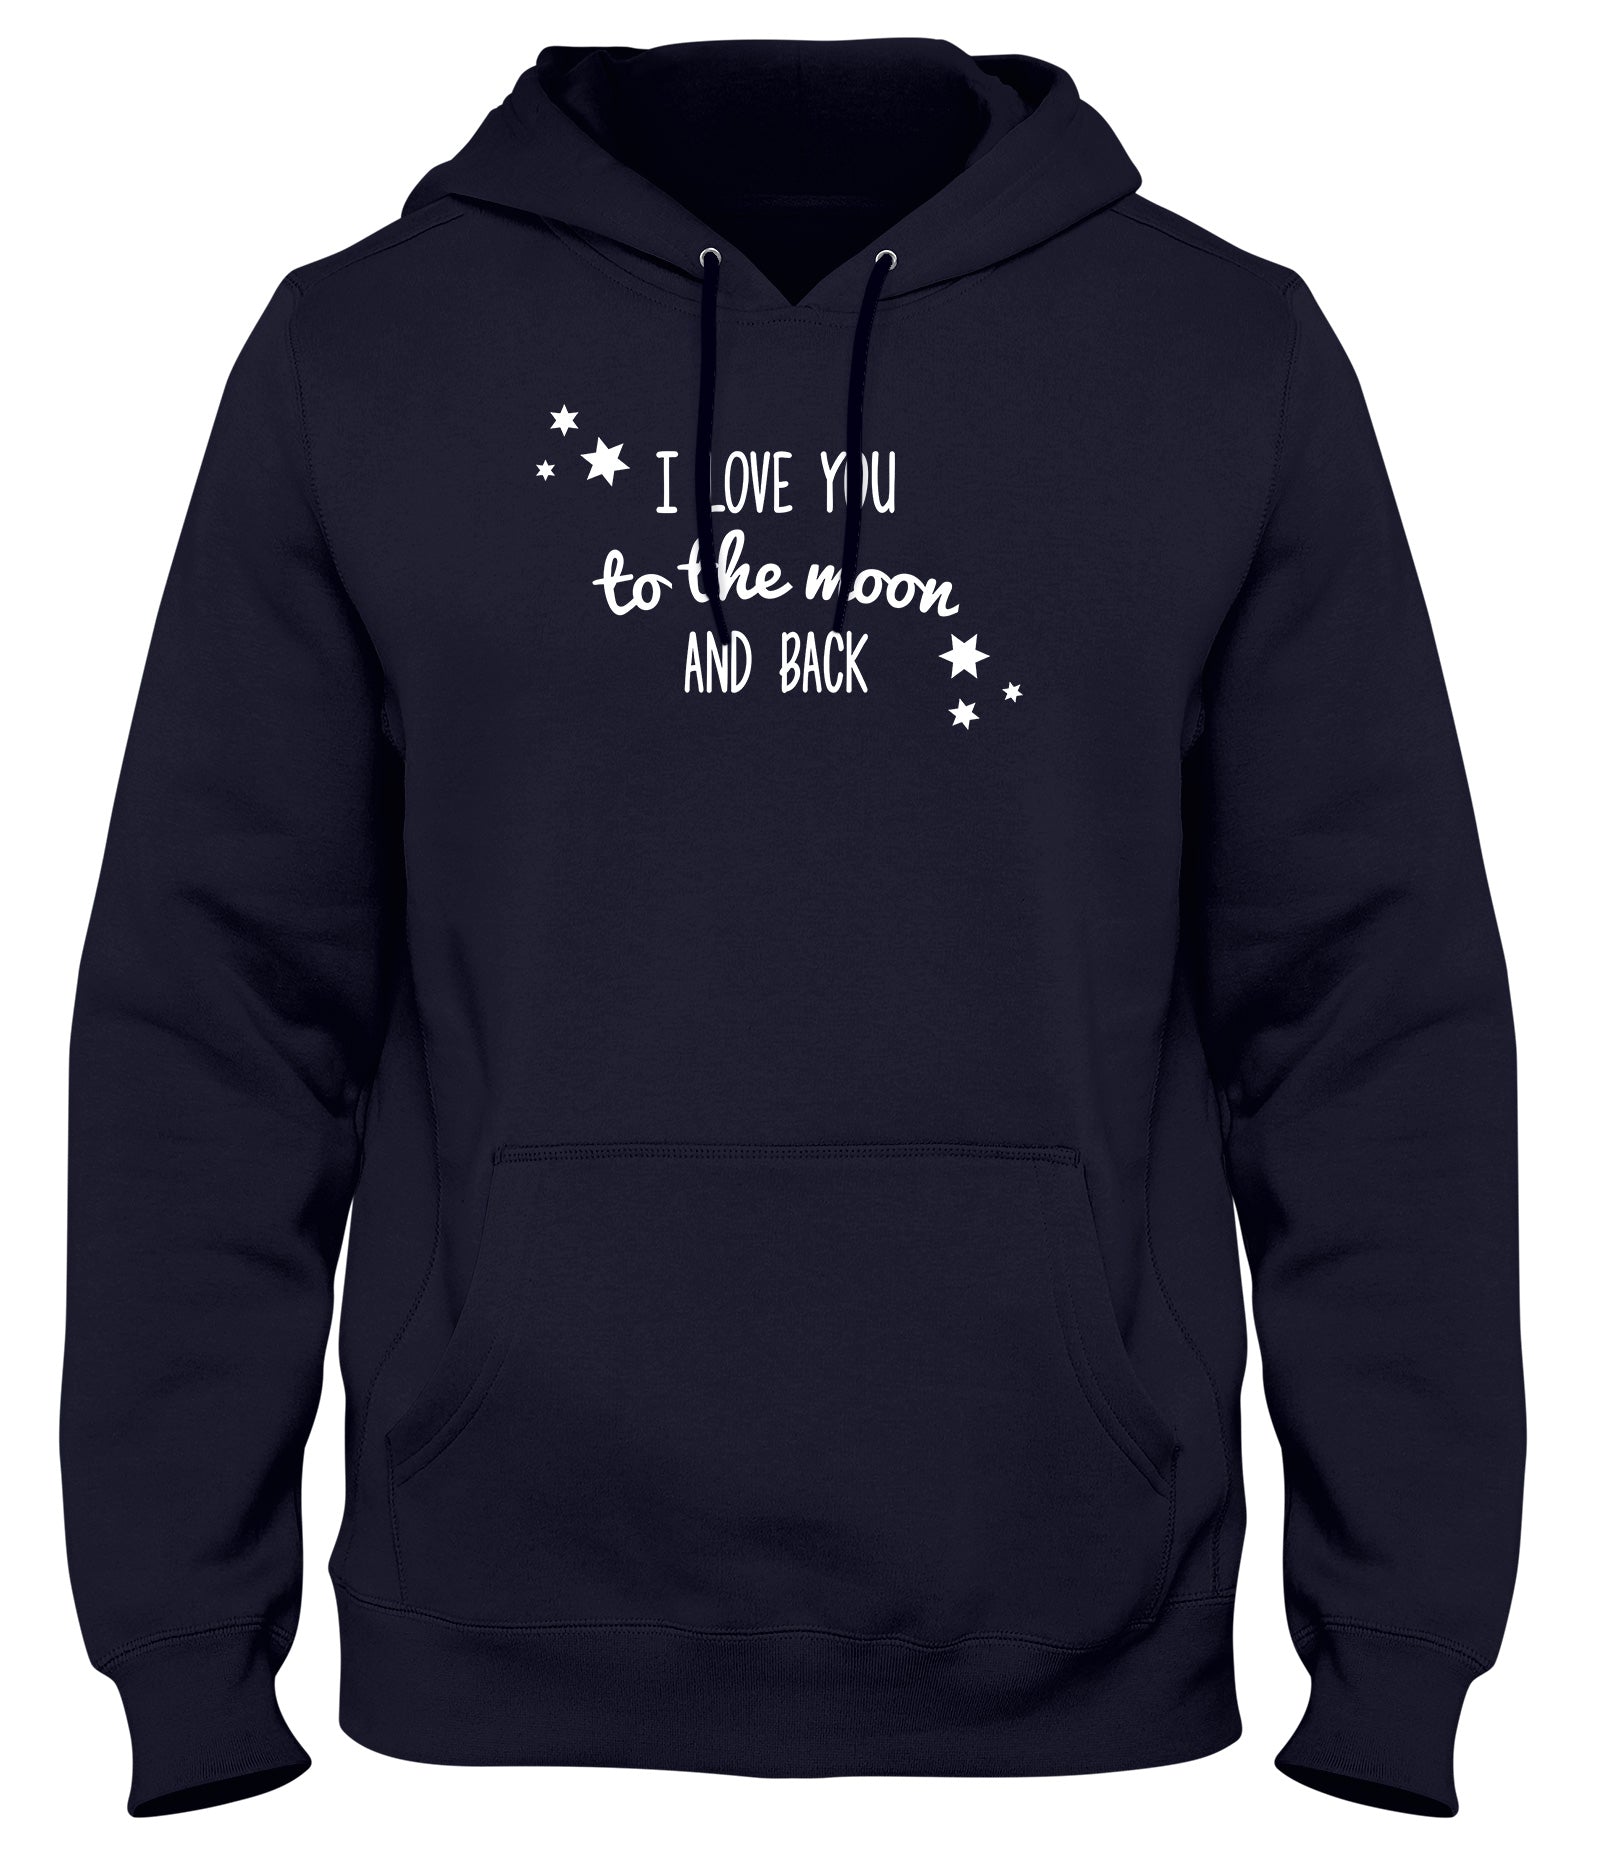 I LOVE YOU TO THE MOON AND BACK MENS LADIES WOMENS UNISEX HOODIE